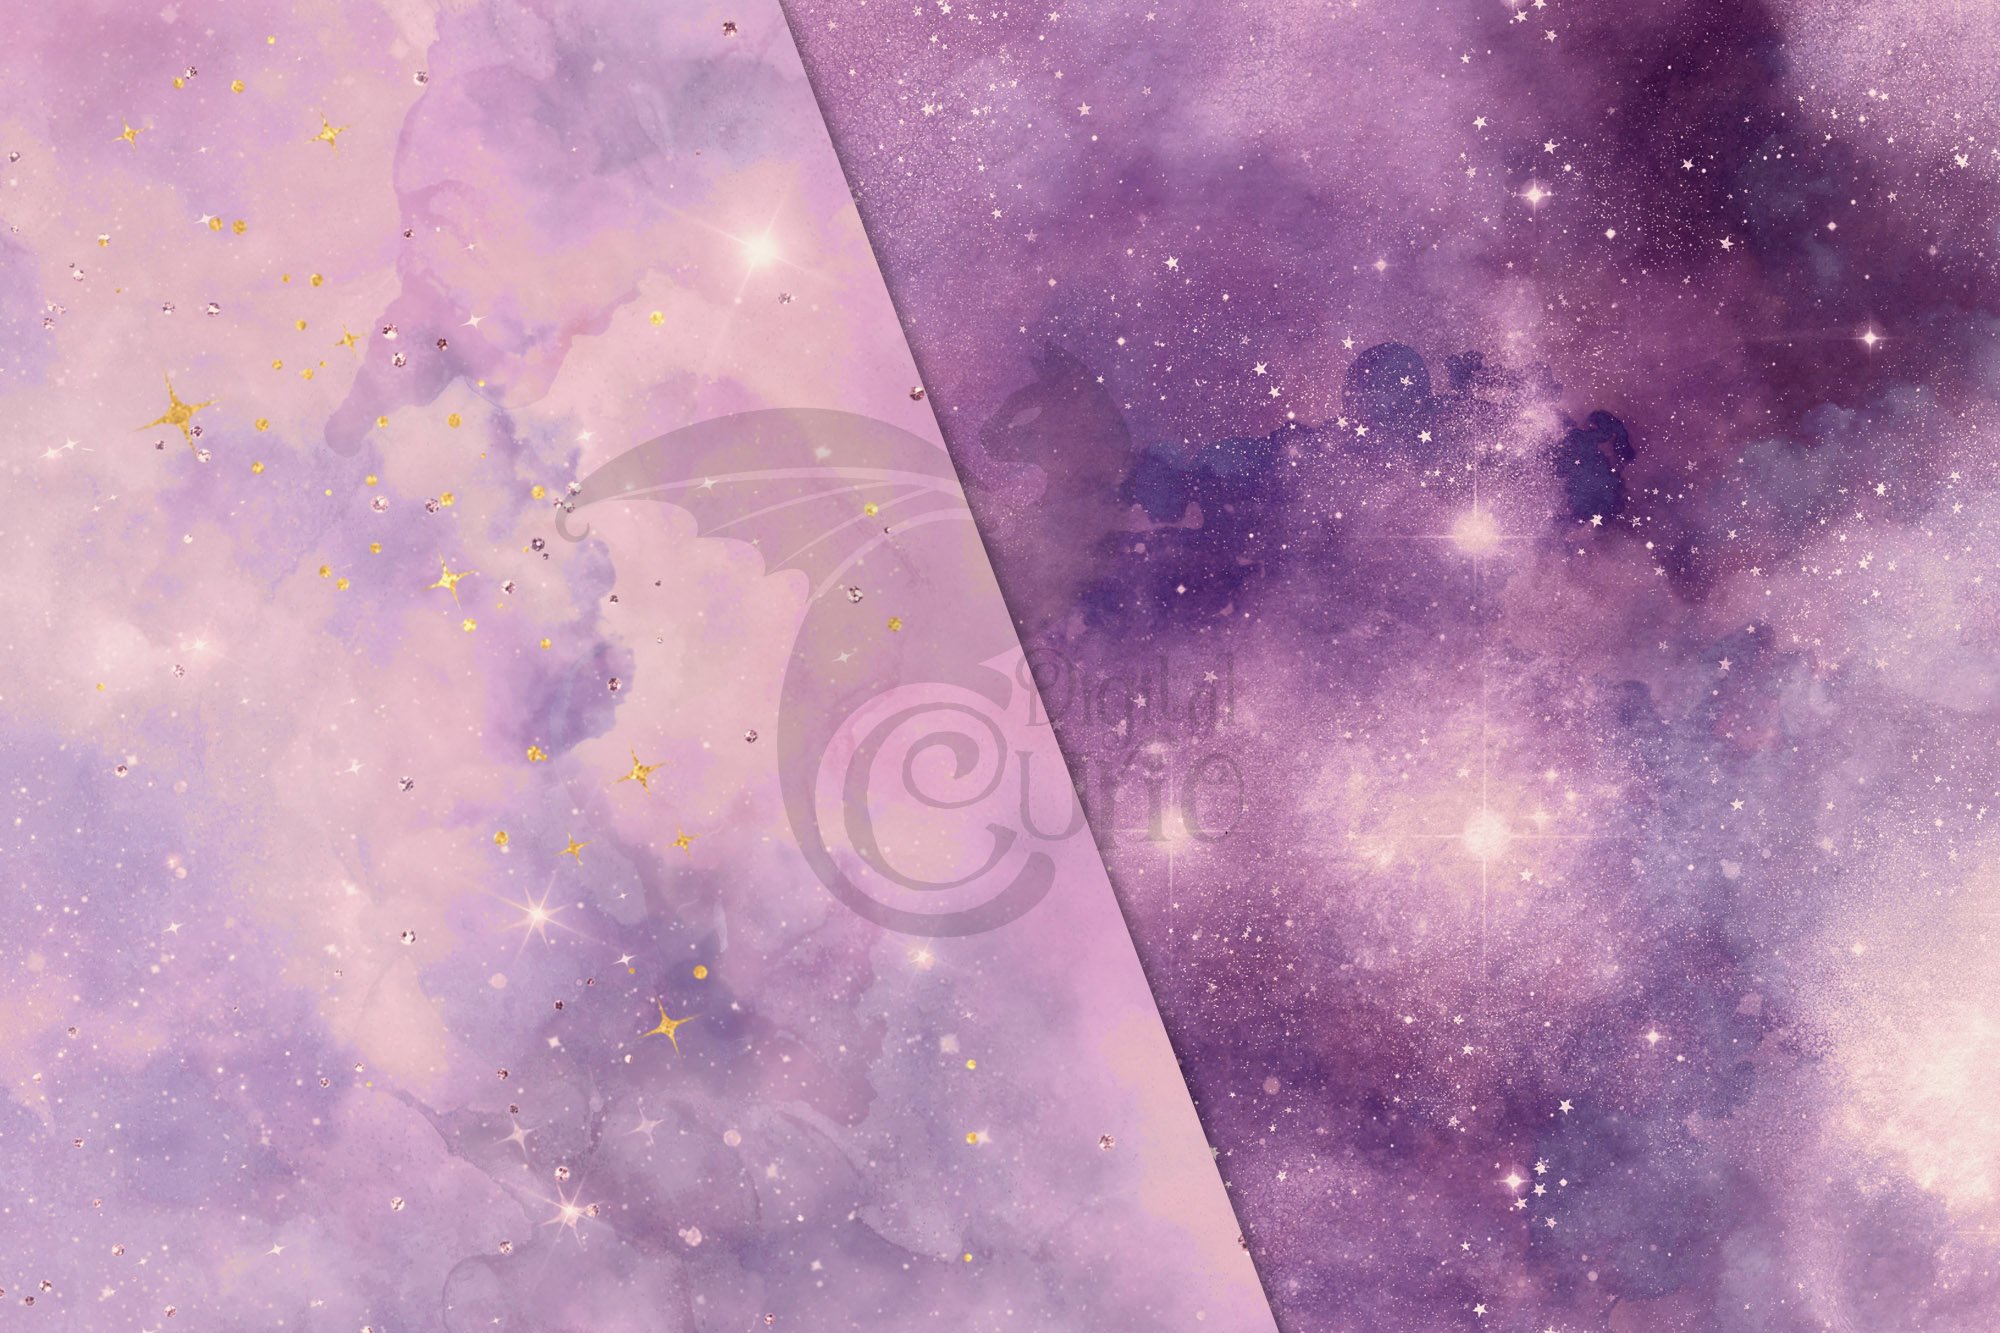 Dusk Rose Galaxy Textures preview image.